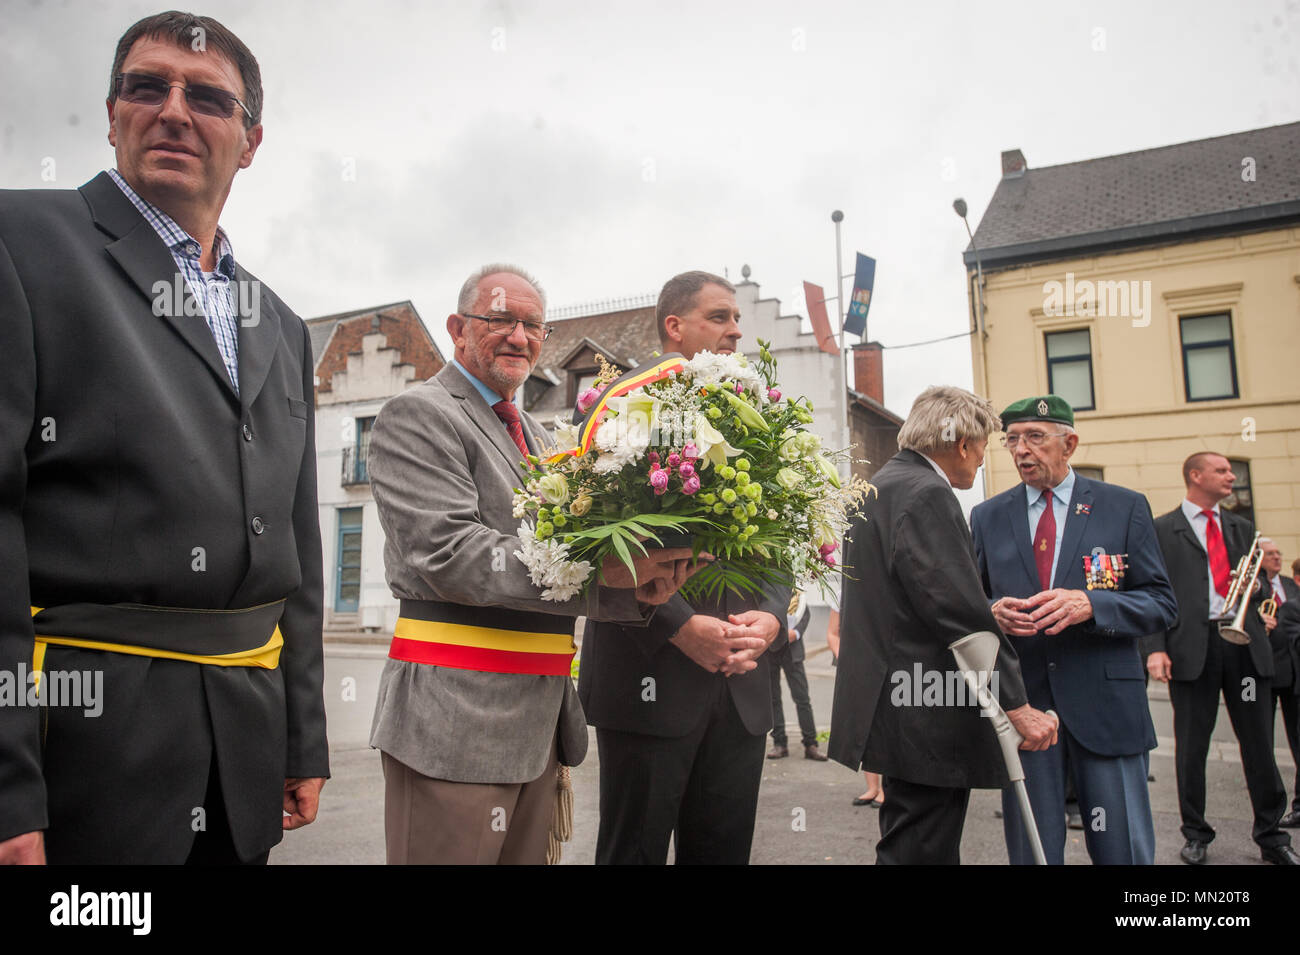 André Desmarlières, Mayor of Brugelette, Belgium and LTC Bill Lovell, Command Chaplain for USAG Benelux prepare to lay flowers at a monument during the memorial ceremony for Belgian Lt. Col. Joseph Daumerie, Aug. 15, 2017, Brugelette, Belgium. The memorial commemorates the 75th anniversary of Daumerie's death. Daumerie is a war hero and fighter pilot who was executed in 1942 during World War II. The event offered a unique opportunity for the U.S. service members to honor a fallen hero and strengthen their relationship with NATO allies during the U.S. Army Garrison Benelux's 50th anniversary in Stock Photo